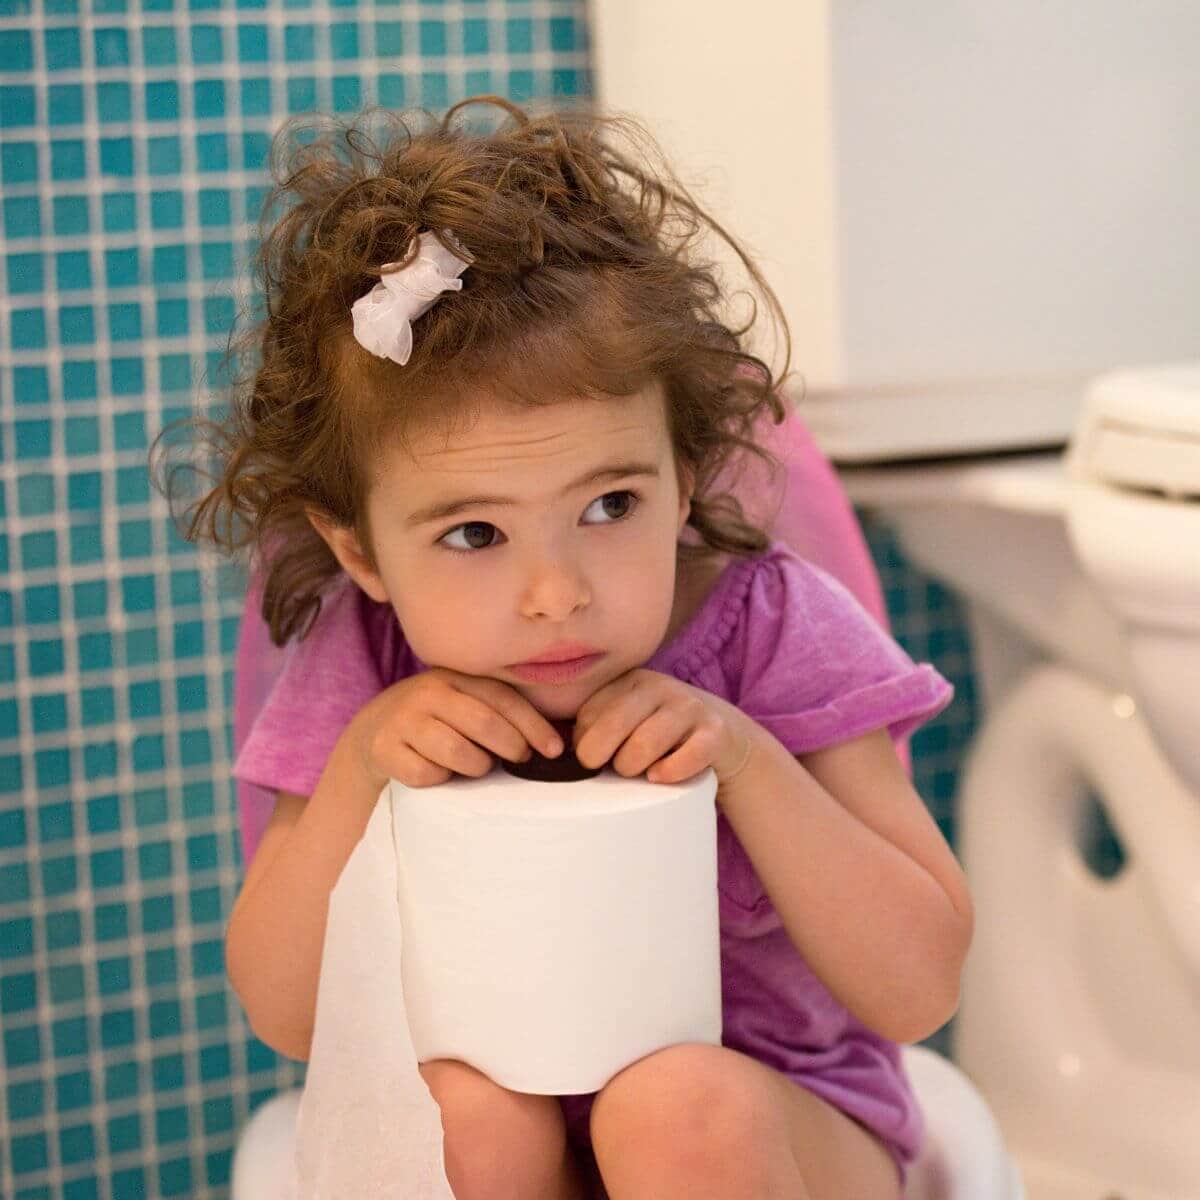 In the background is a white toilet and blue tiled wall. A little girl is sitting on a potty seat. She is wearing a purple dress and has her hands and chin resting on a roll of toilet paper